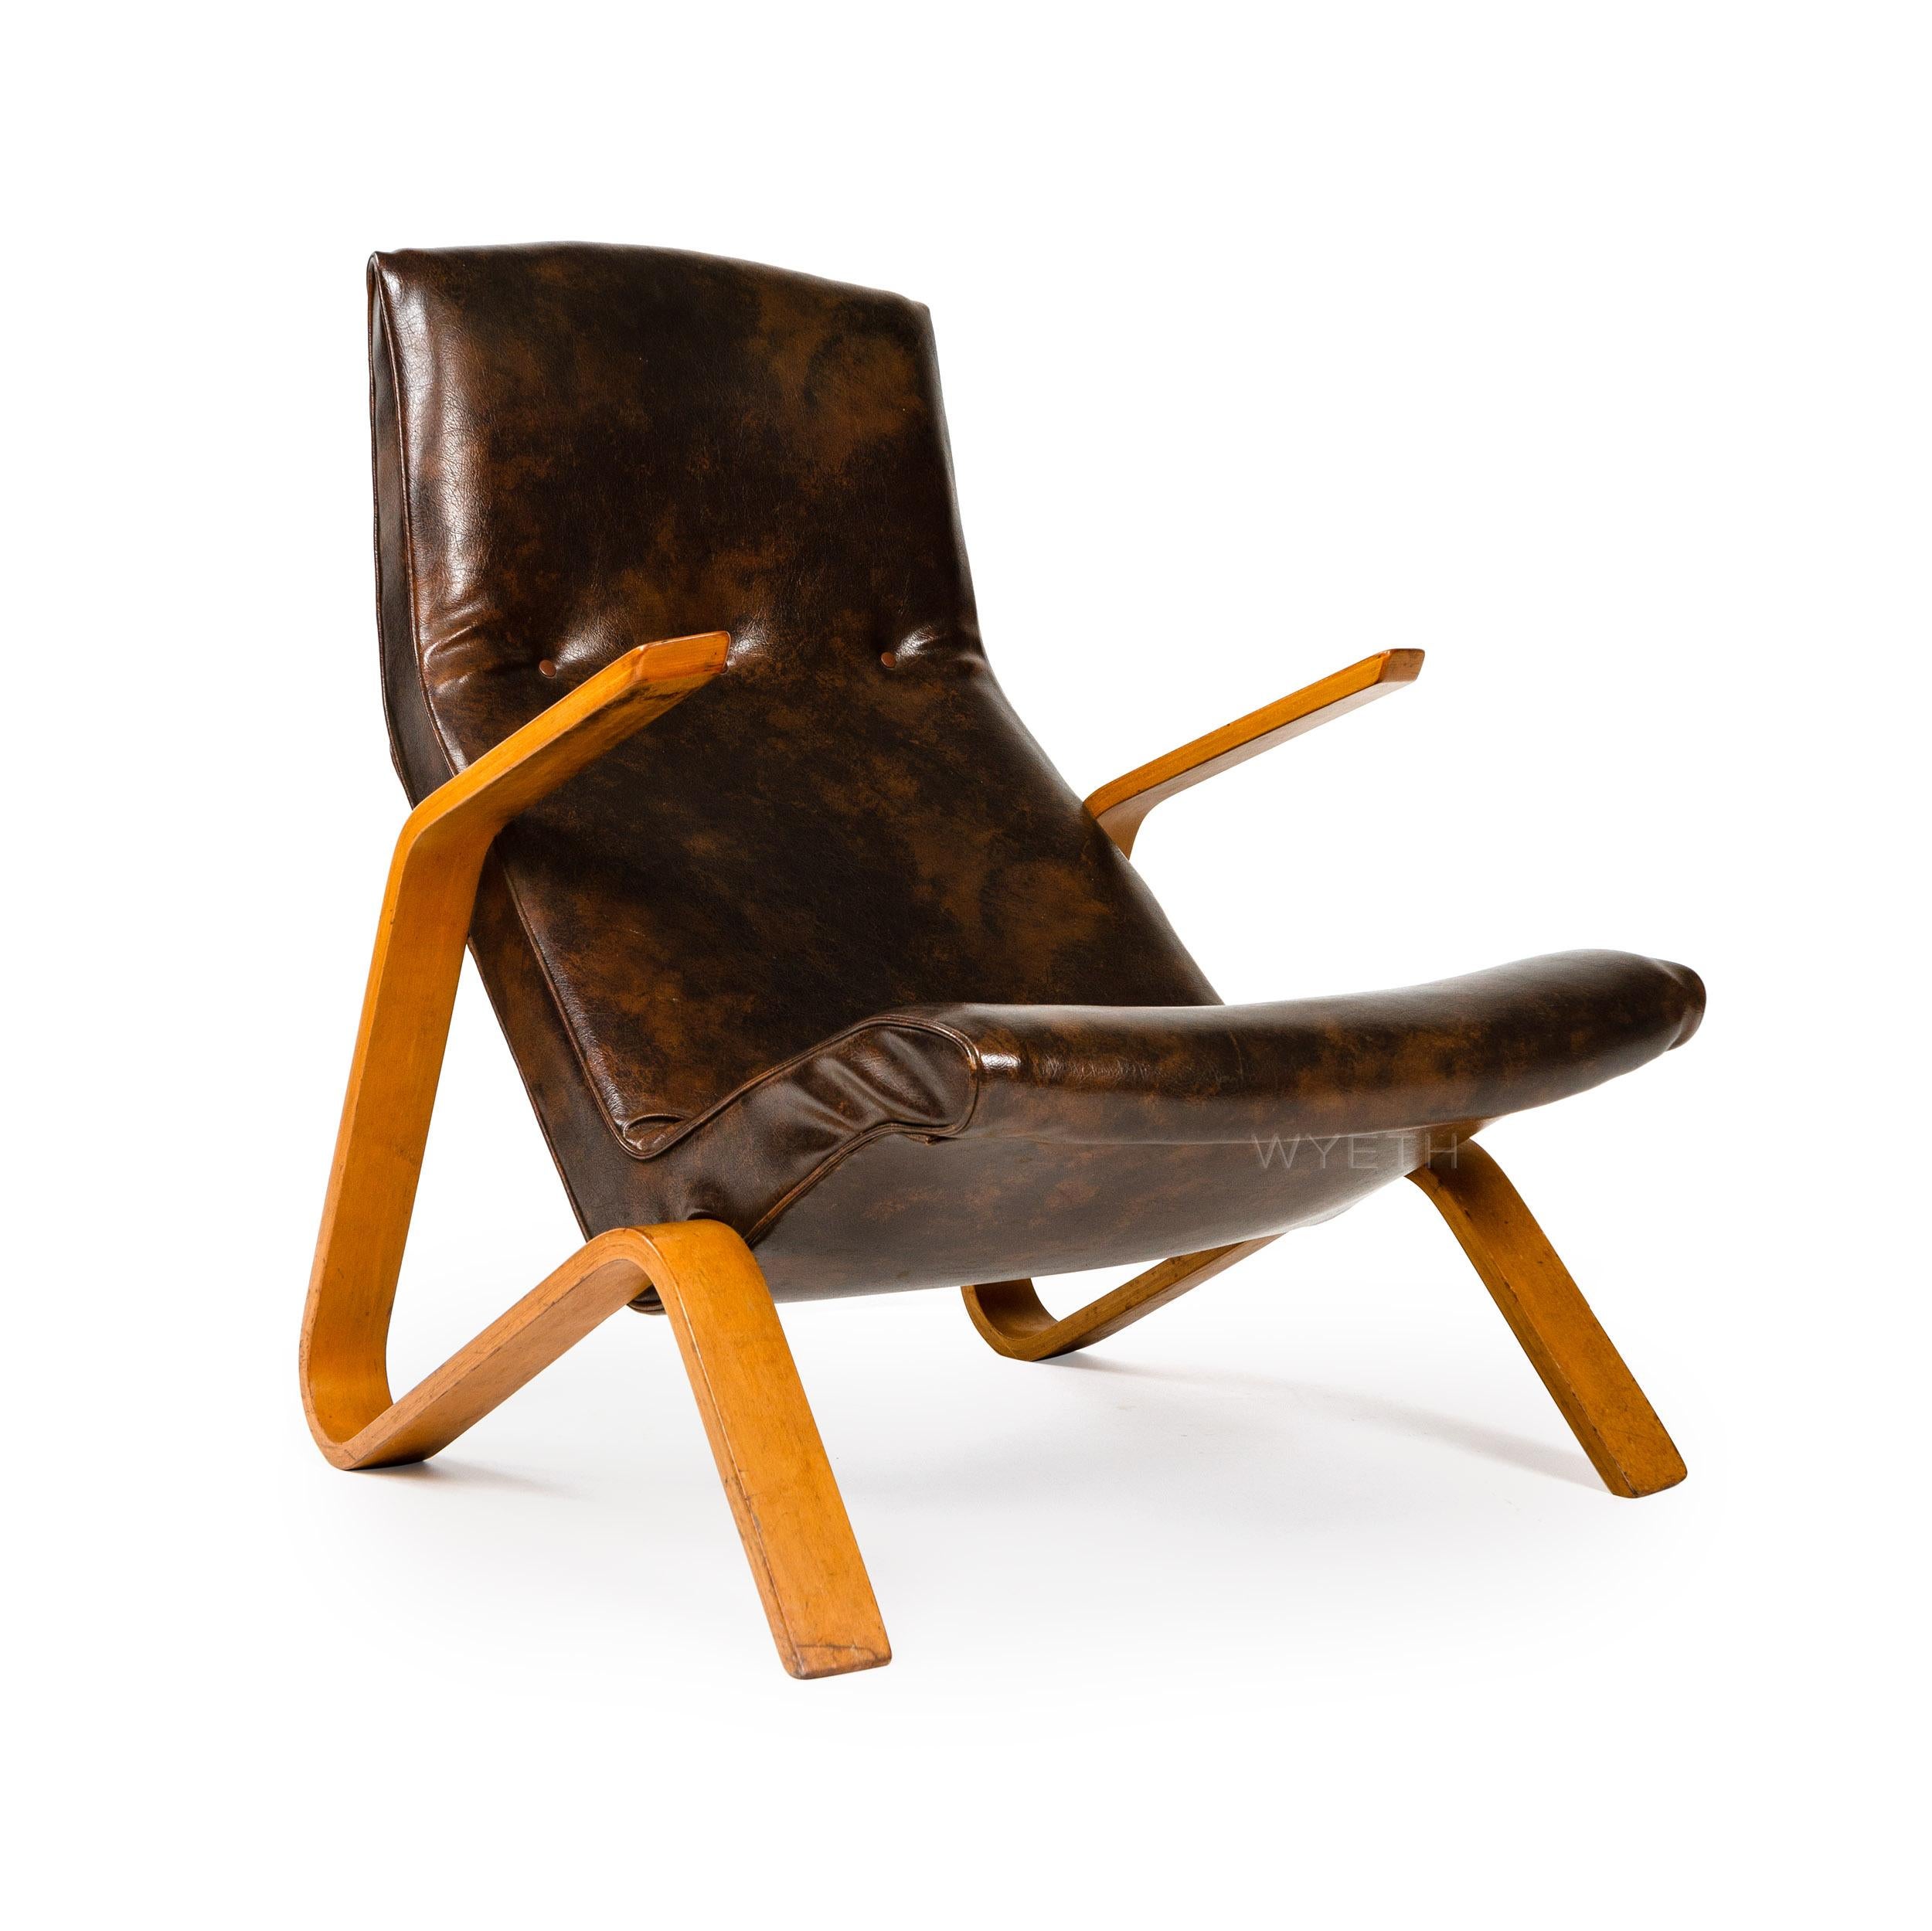 An early lounge chair with original tufted upholstery on a laminated birch bentwood frame. Model 61.